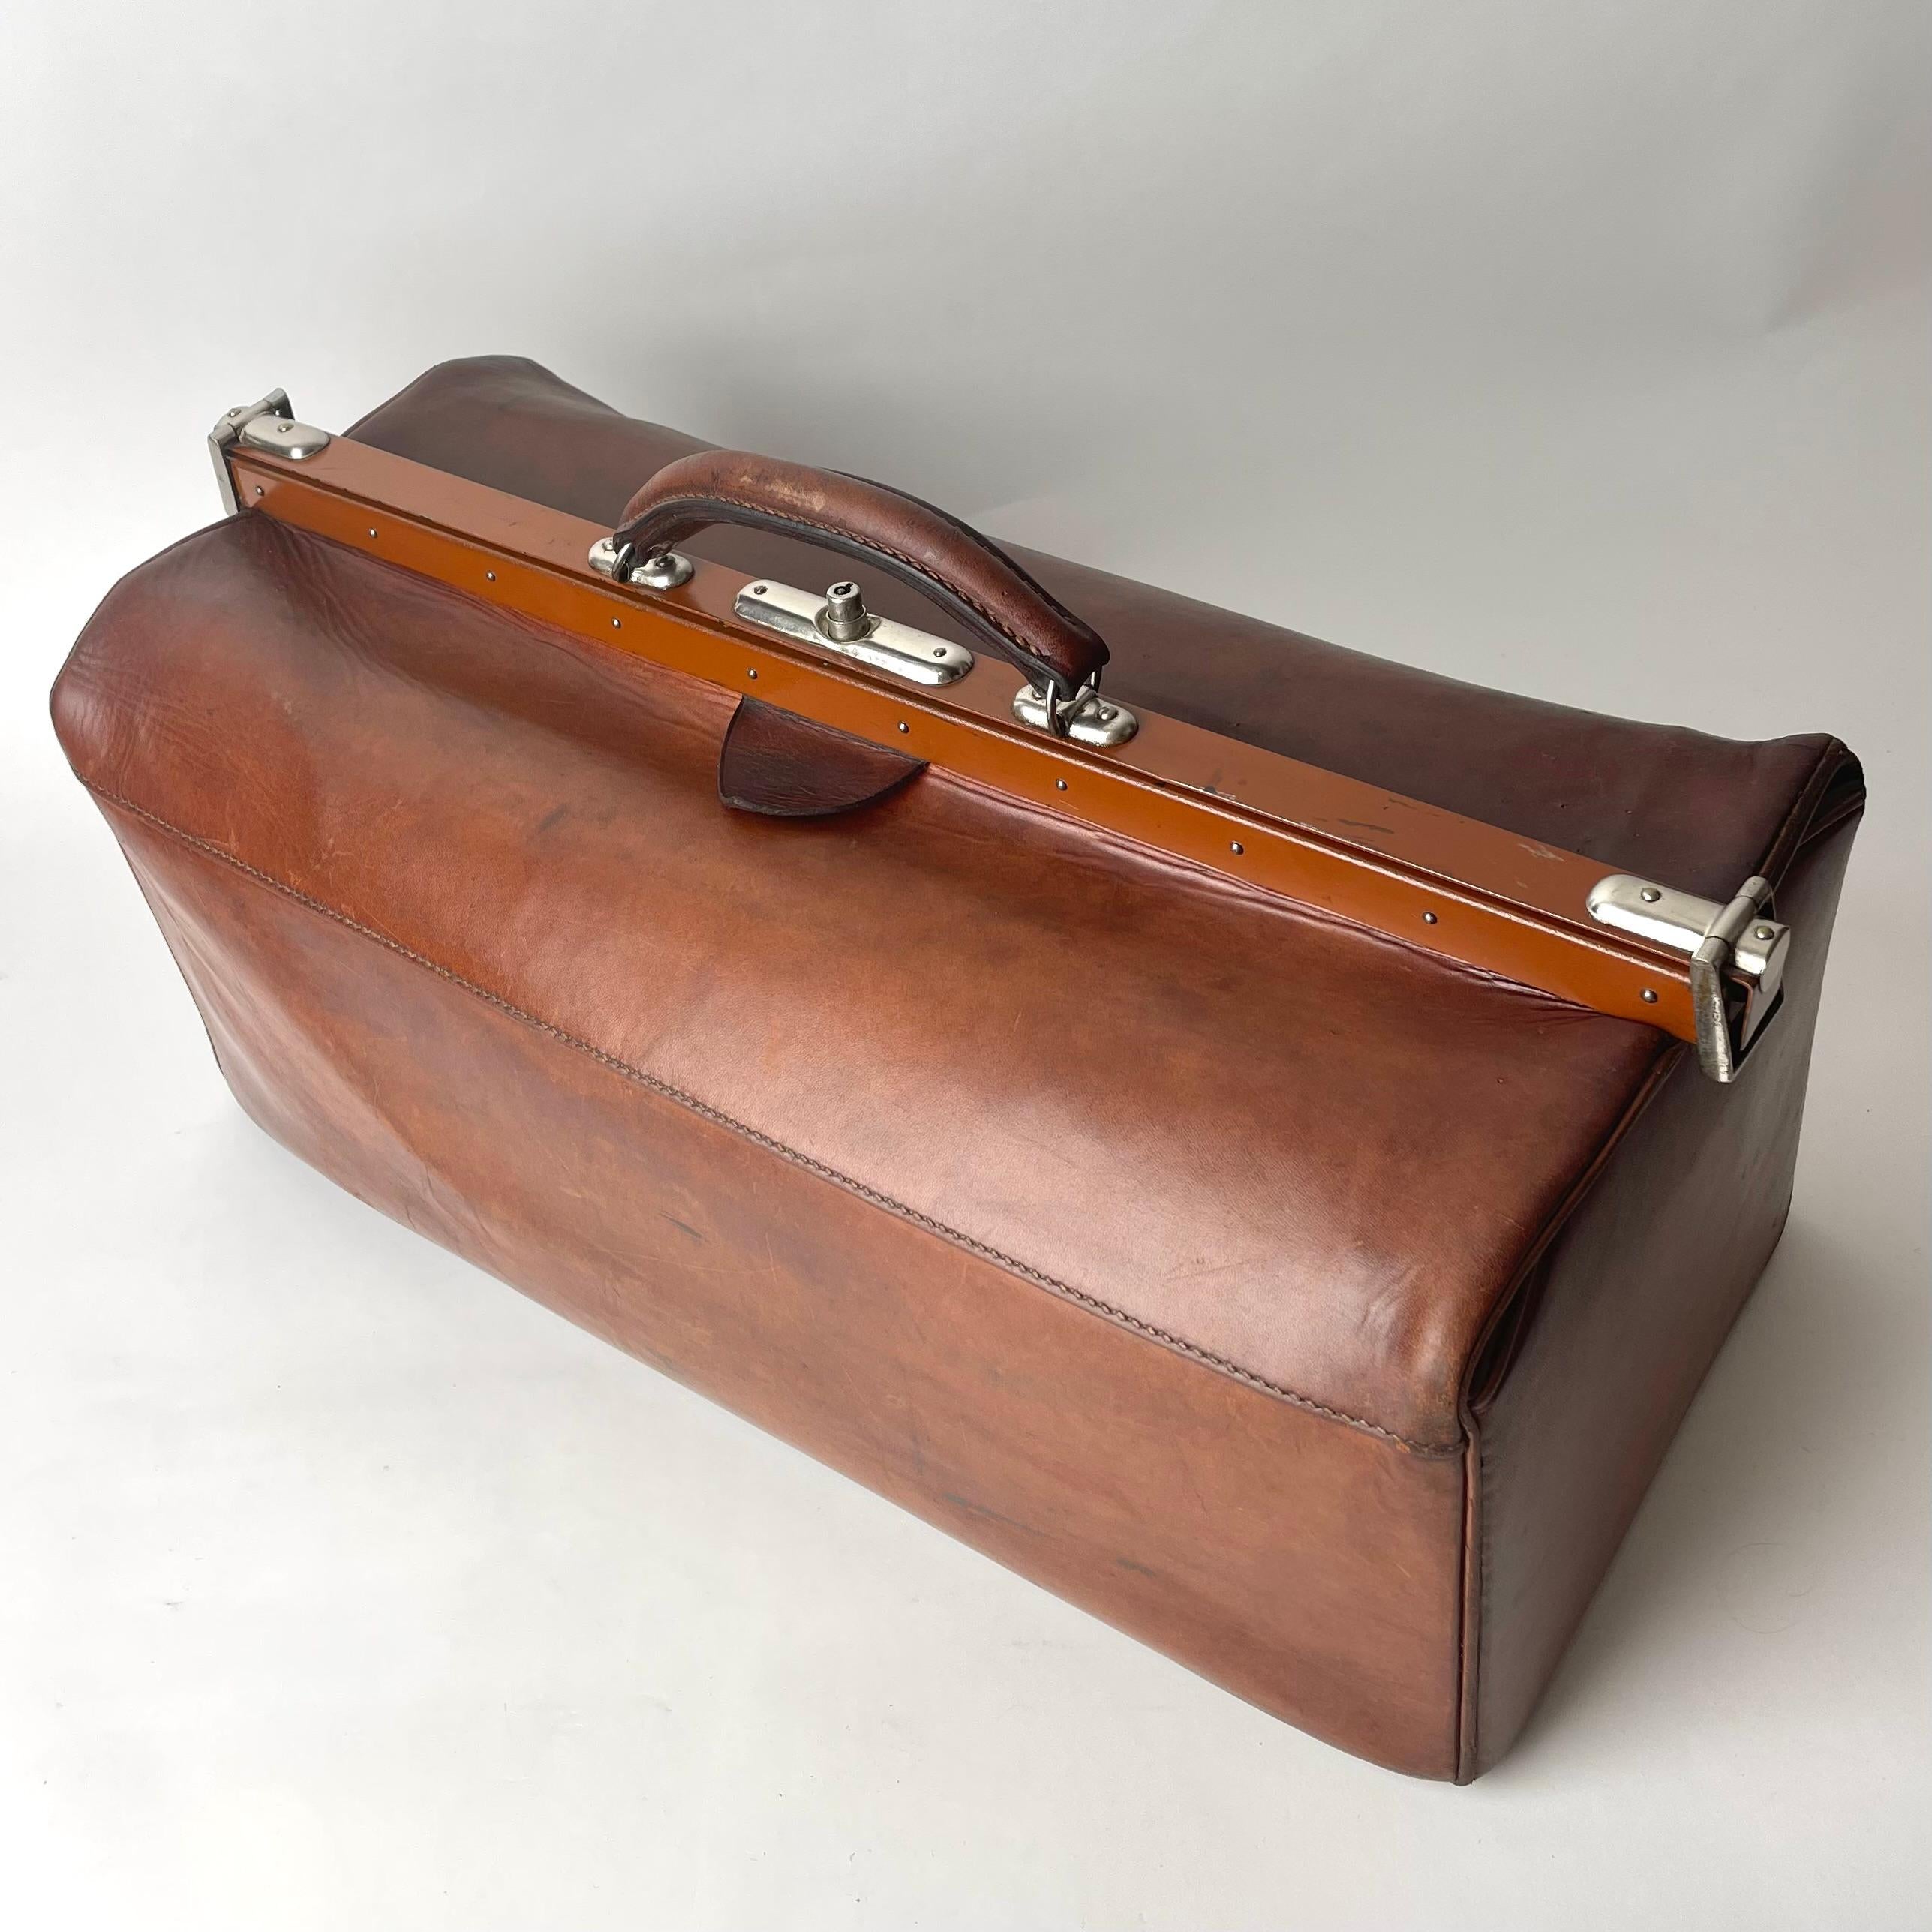 European Early 19th Century Leather Luggage with Nickel Details For Sale